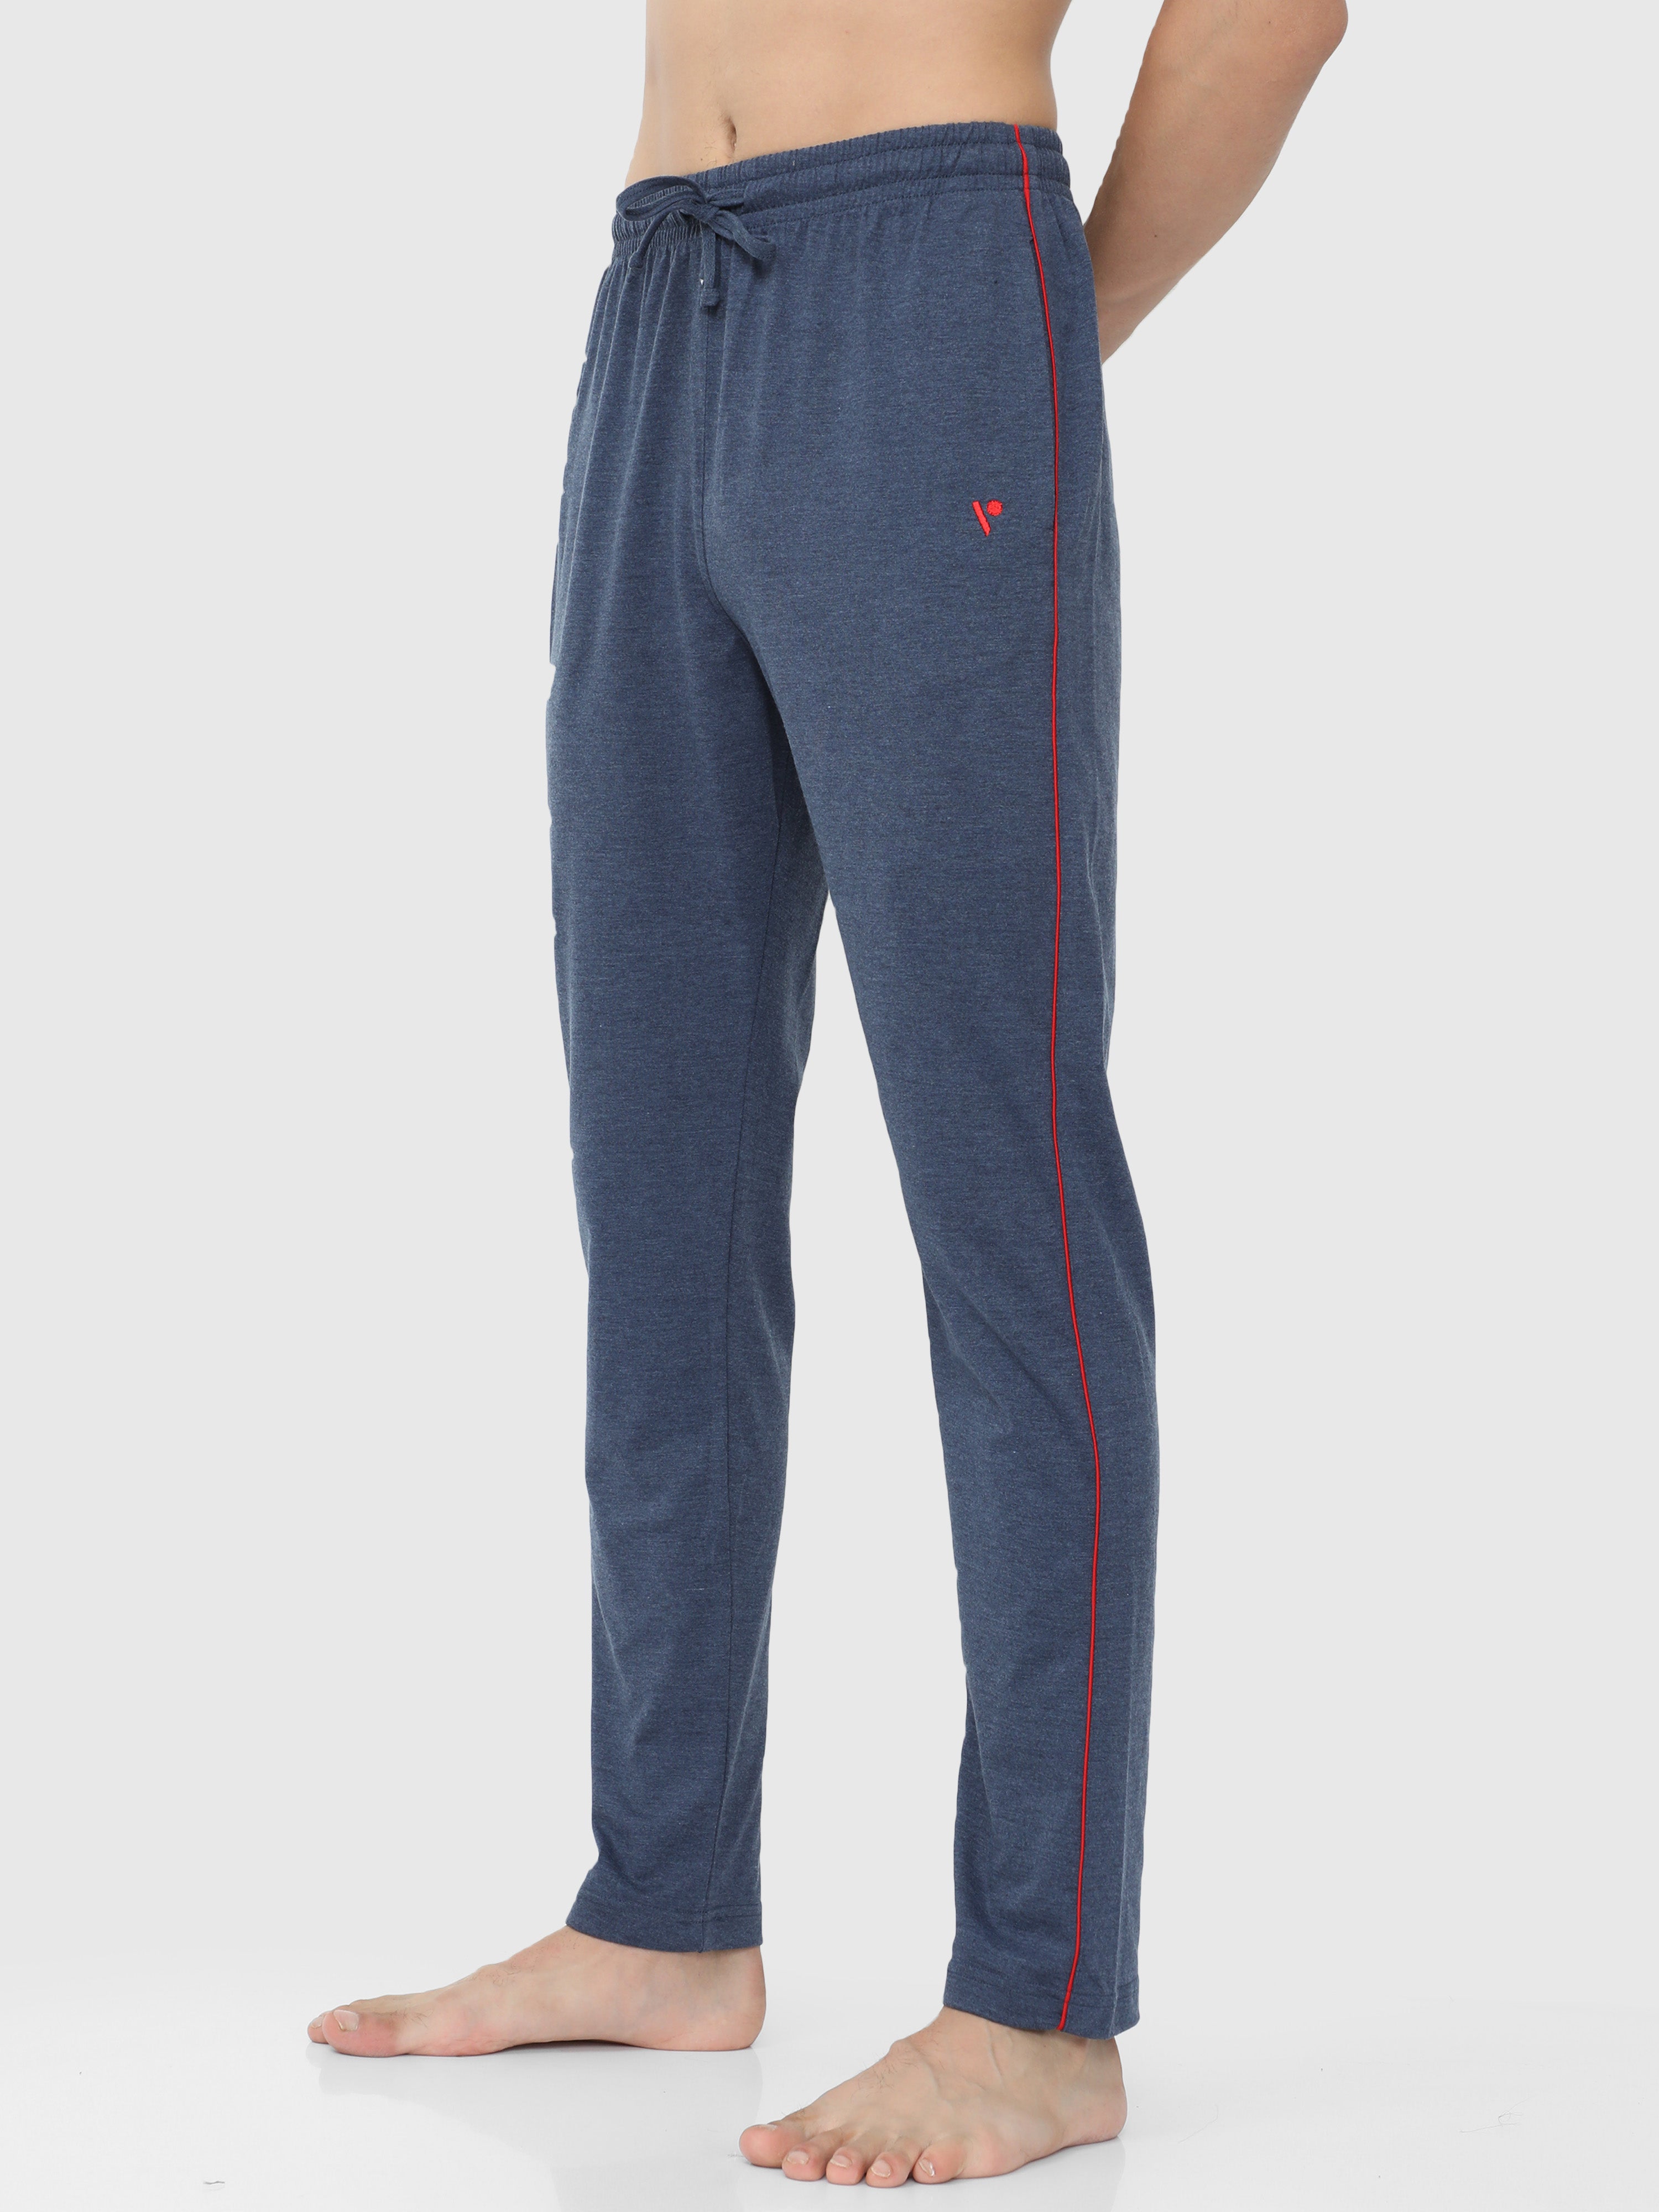 Buy Men Navy Solid Woven Trackpant From Fancode Shop.